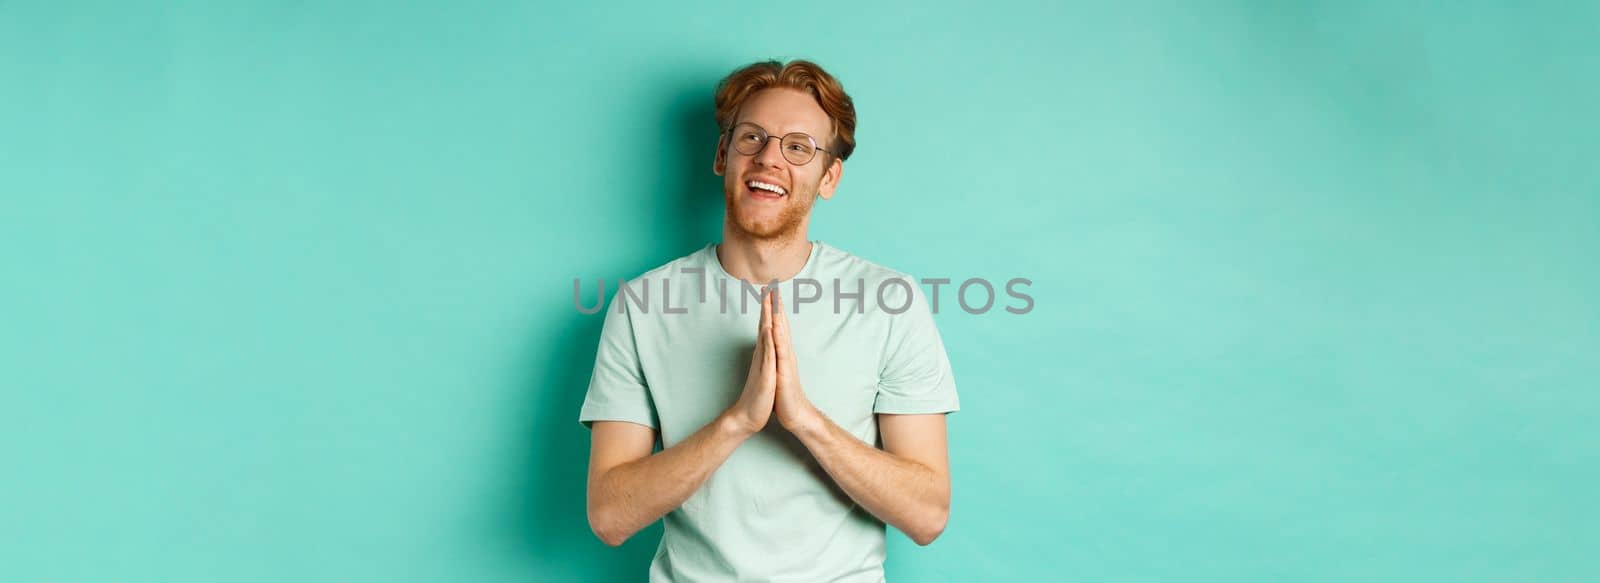 Hopeful redhead man with beard, wearing glasses and t-shirt, holding hands in namaste or plead gesture and looking right, smiling and thanking, standing over turquoise background.